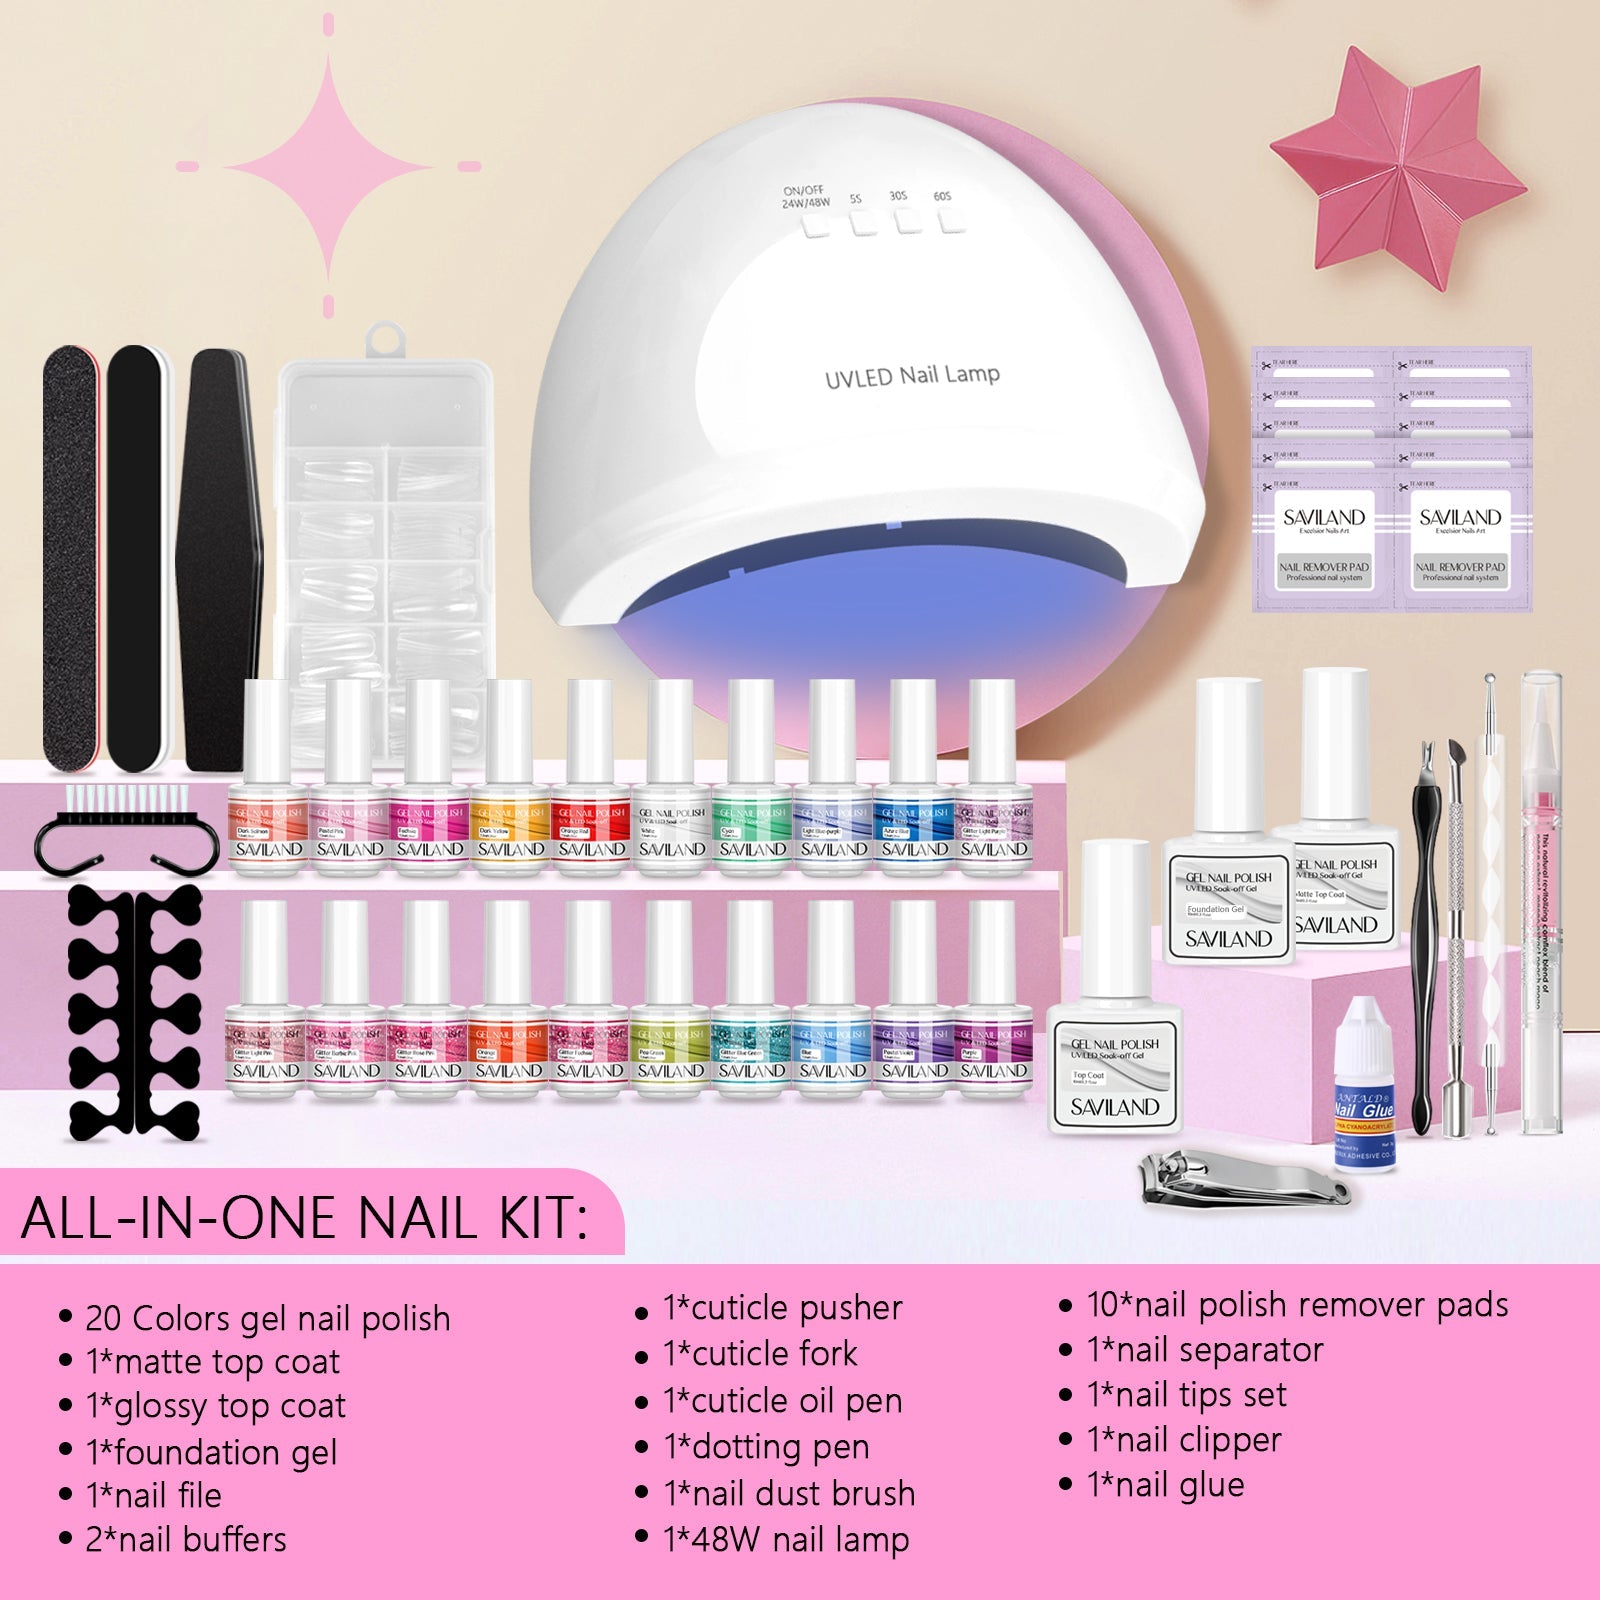 [US ONLY]46PCS All-In-One Gel Nail Polish With Lamp Nail Kit for Beginners  - 20 Colors